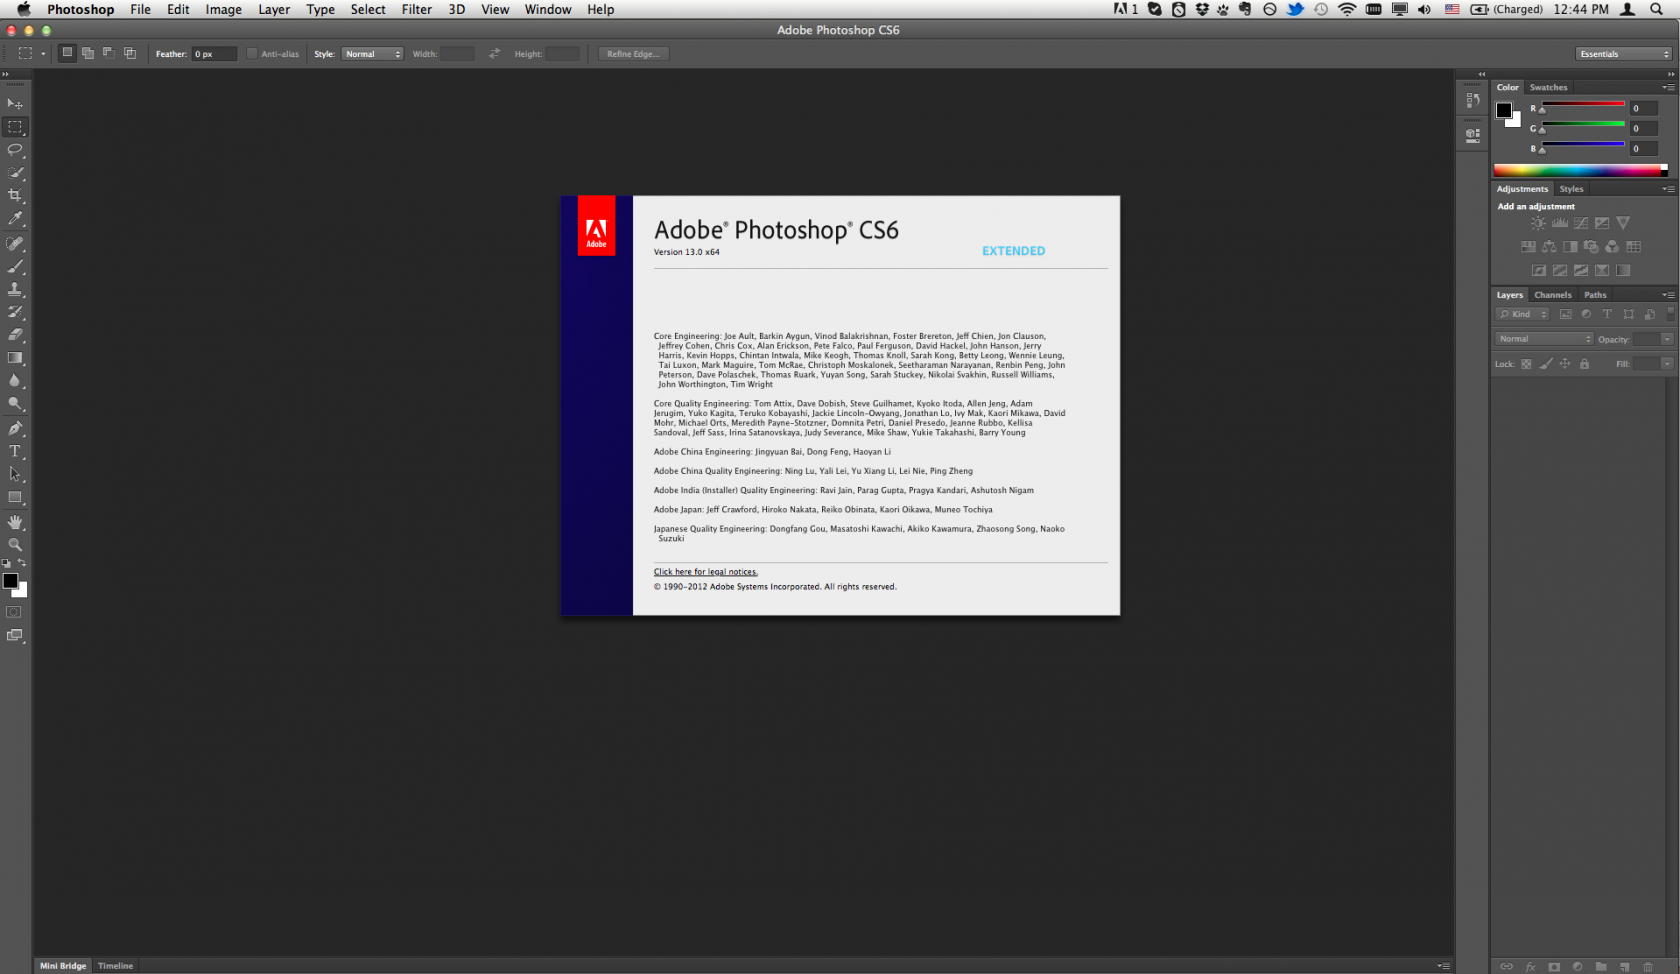 adobe photoshop cs6 free download with crack full version